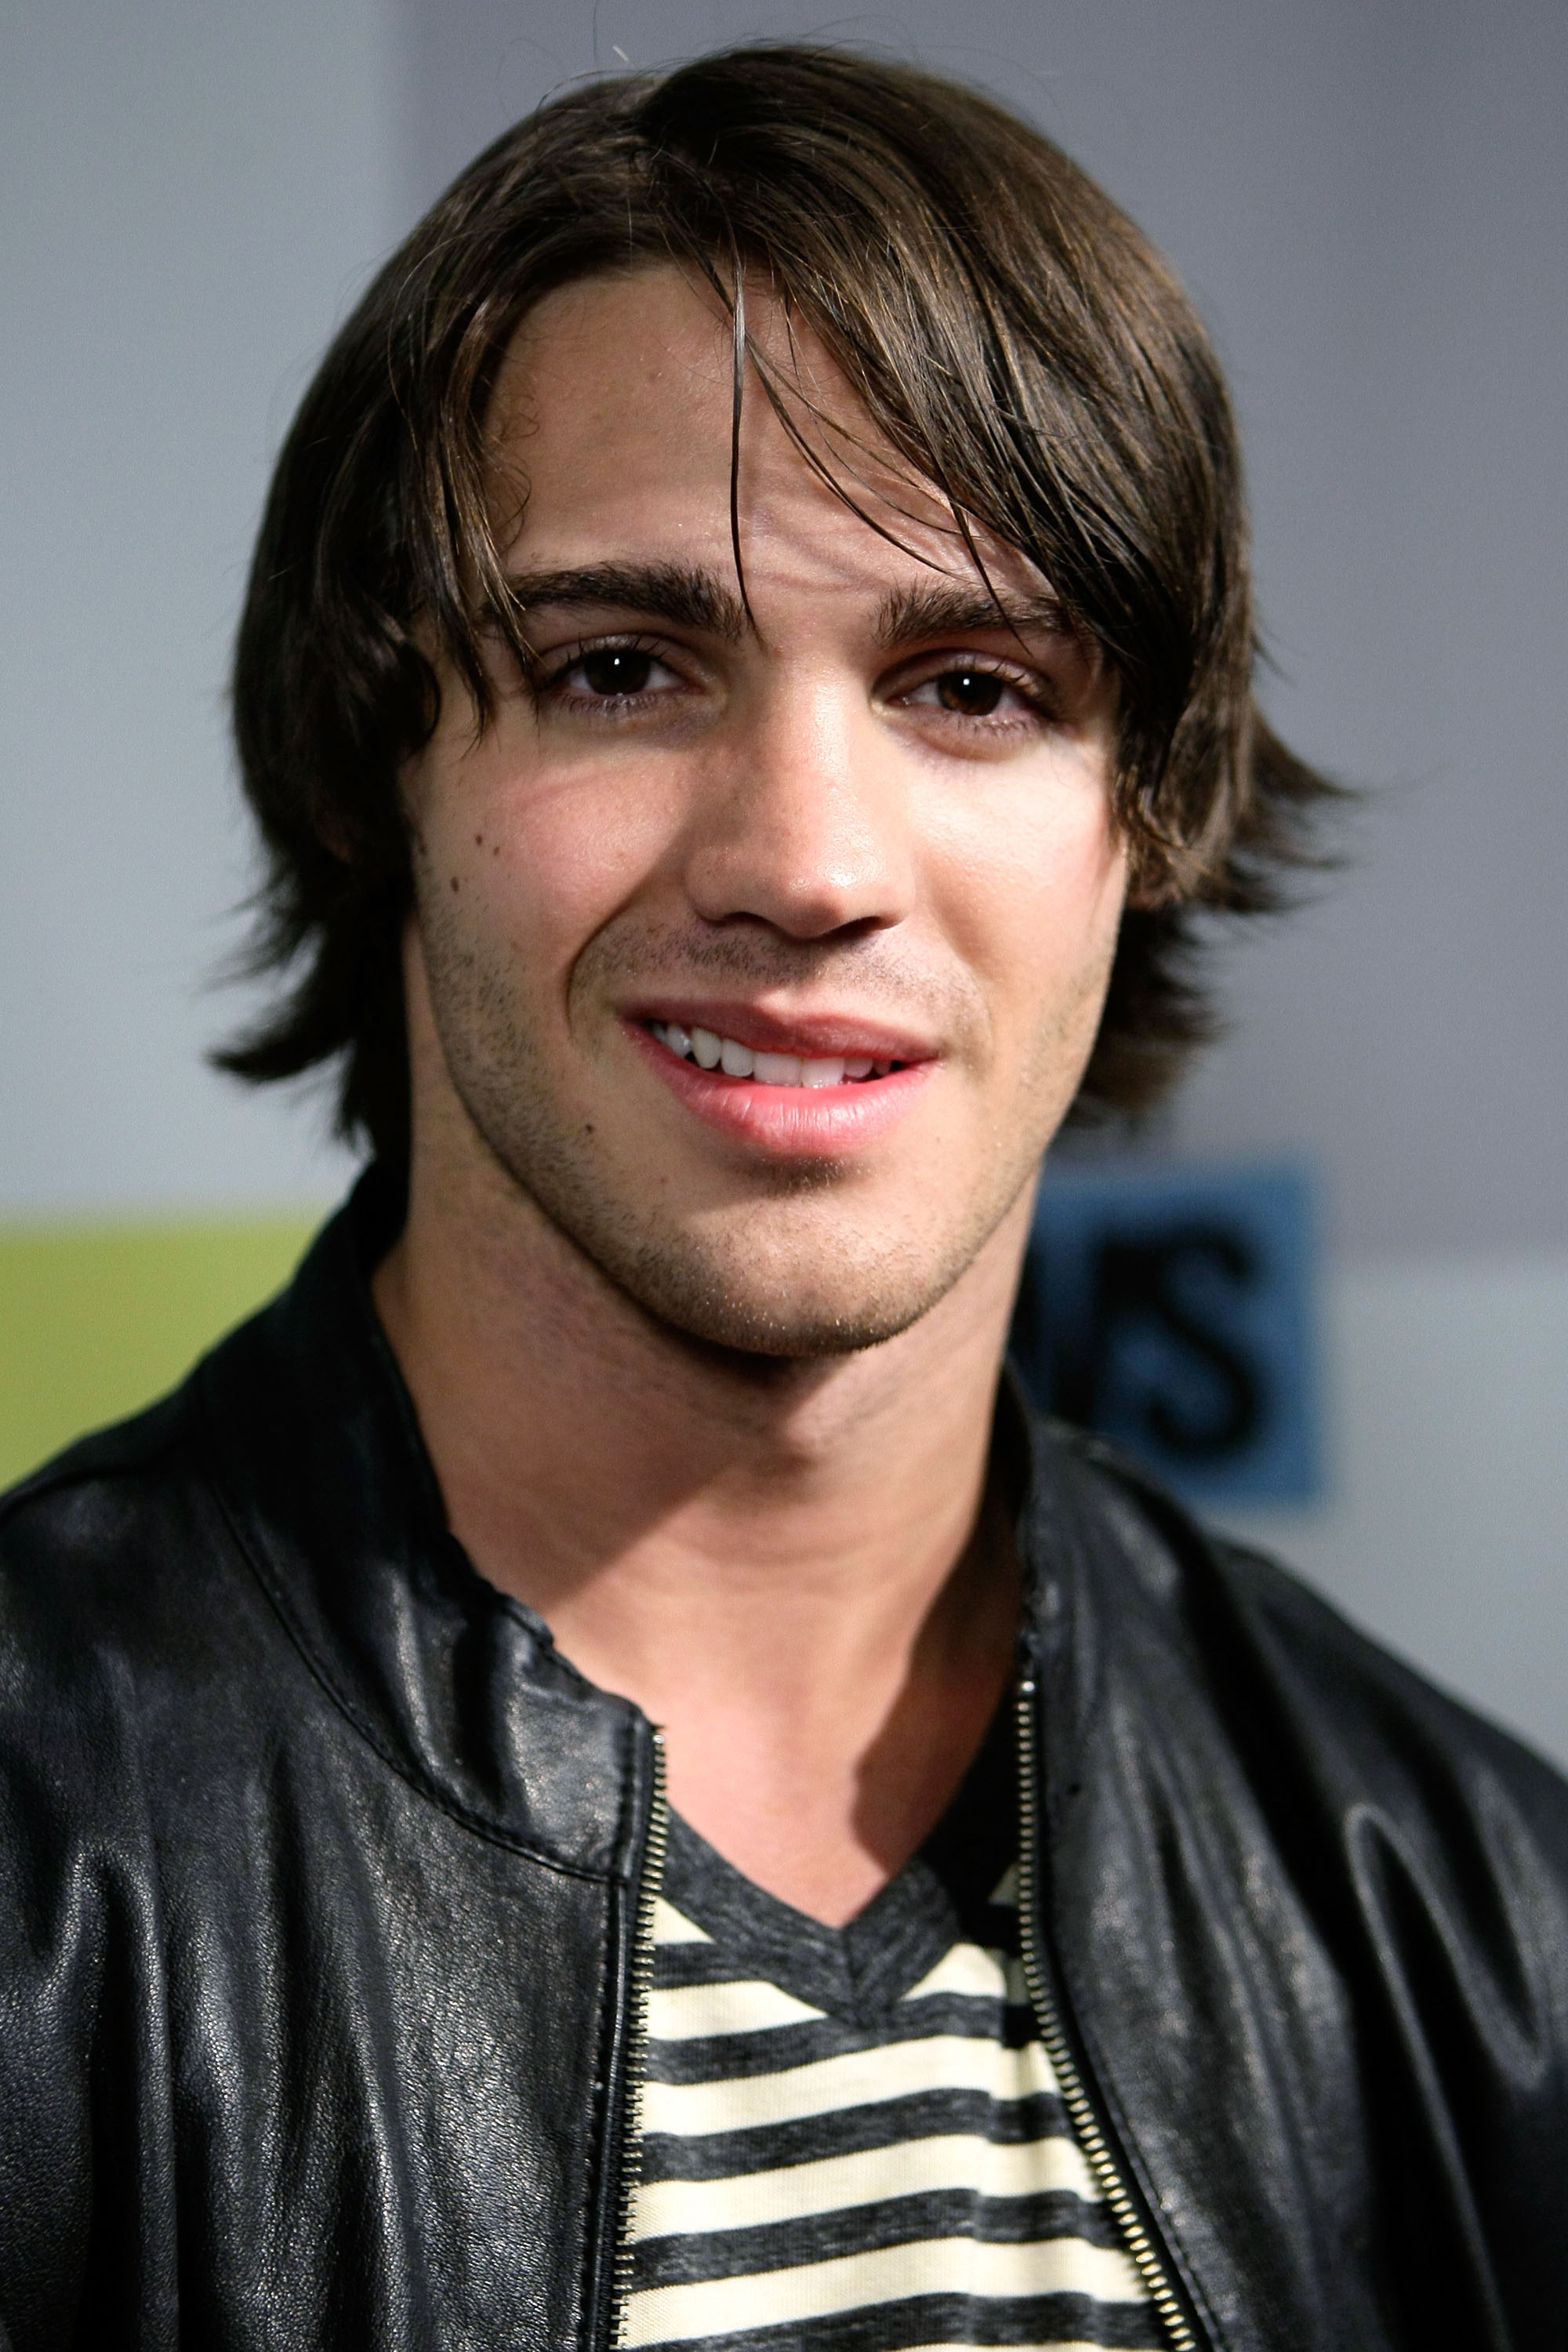 Steven R McQueen attends day 3 of Comic-Con in San Diego, California on July 24, 2010 | Photo: Getty Images